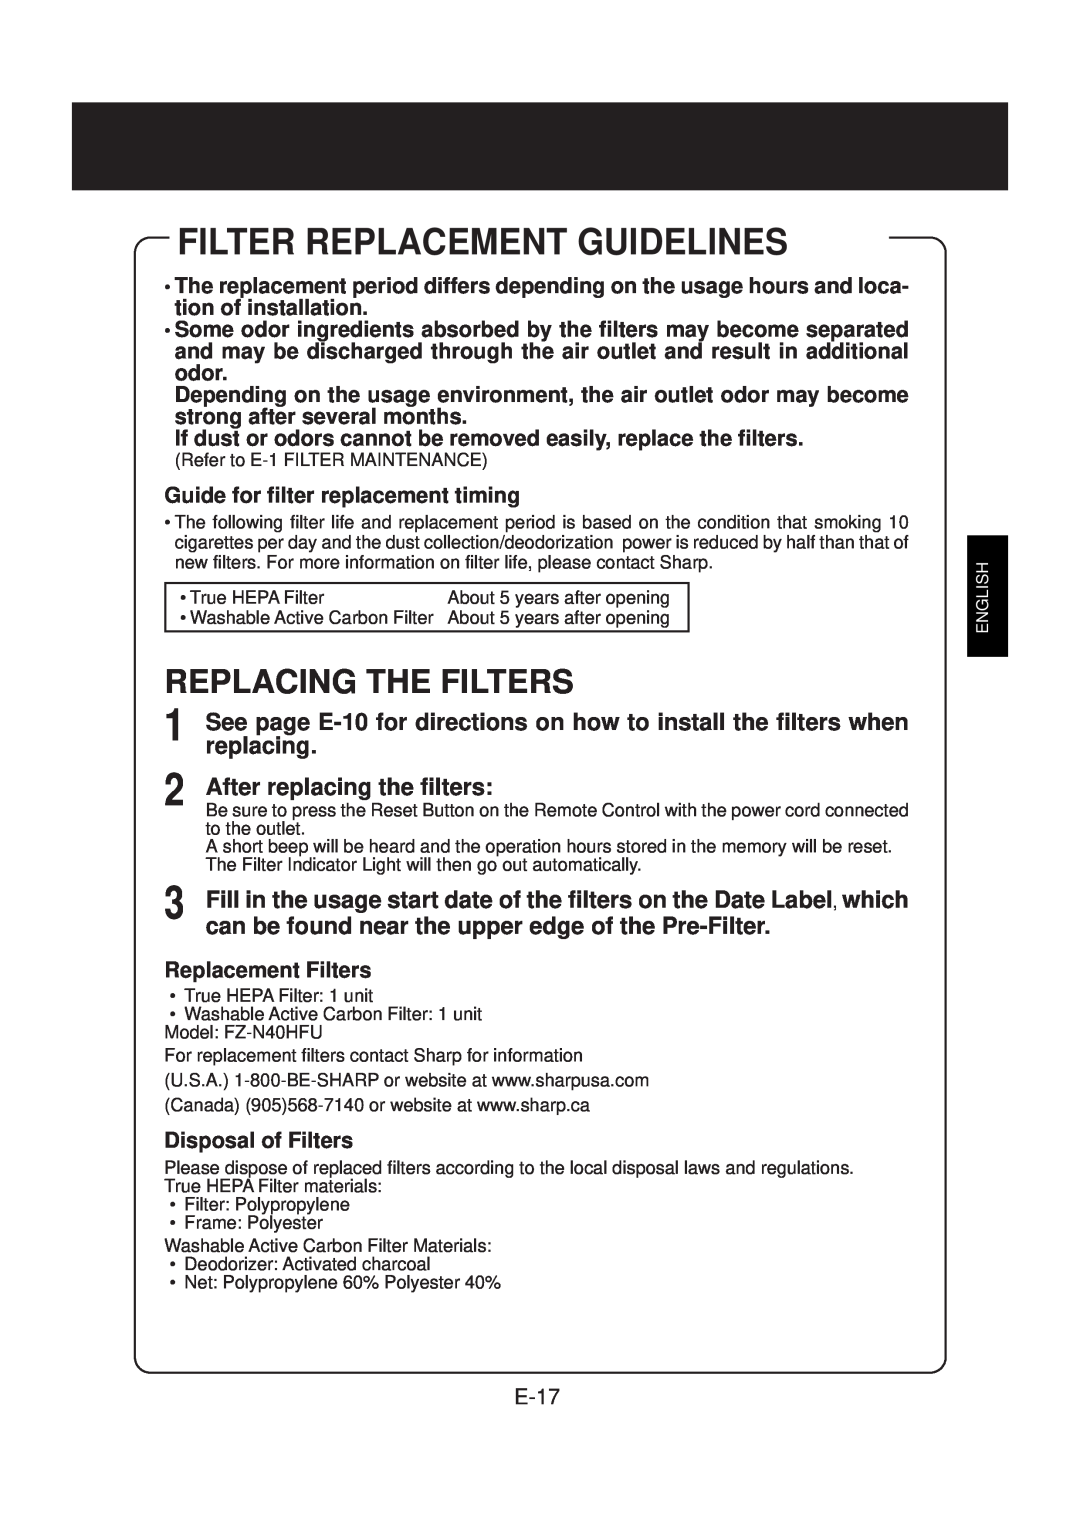 Sharp FP-N40CX operation manual Filter Replacement Guidelines, Replacing The Filters, E-17 